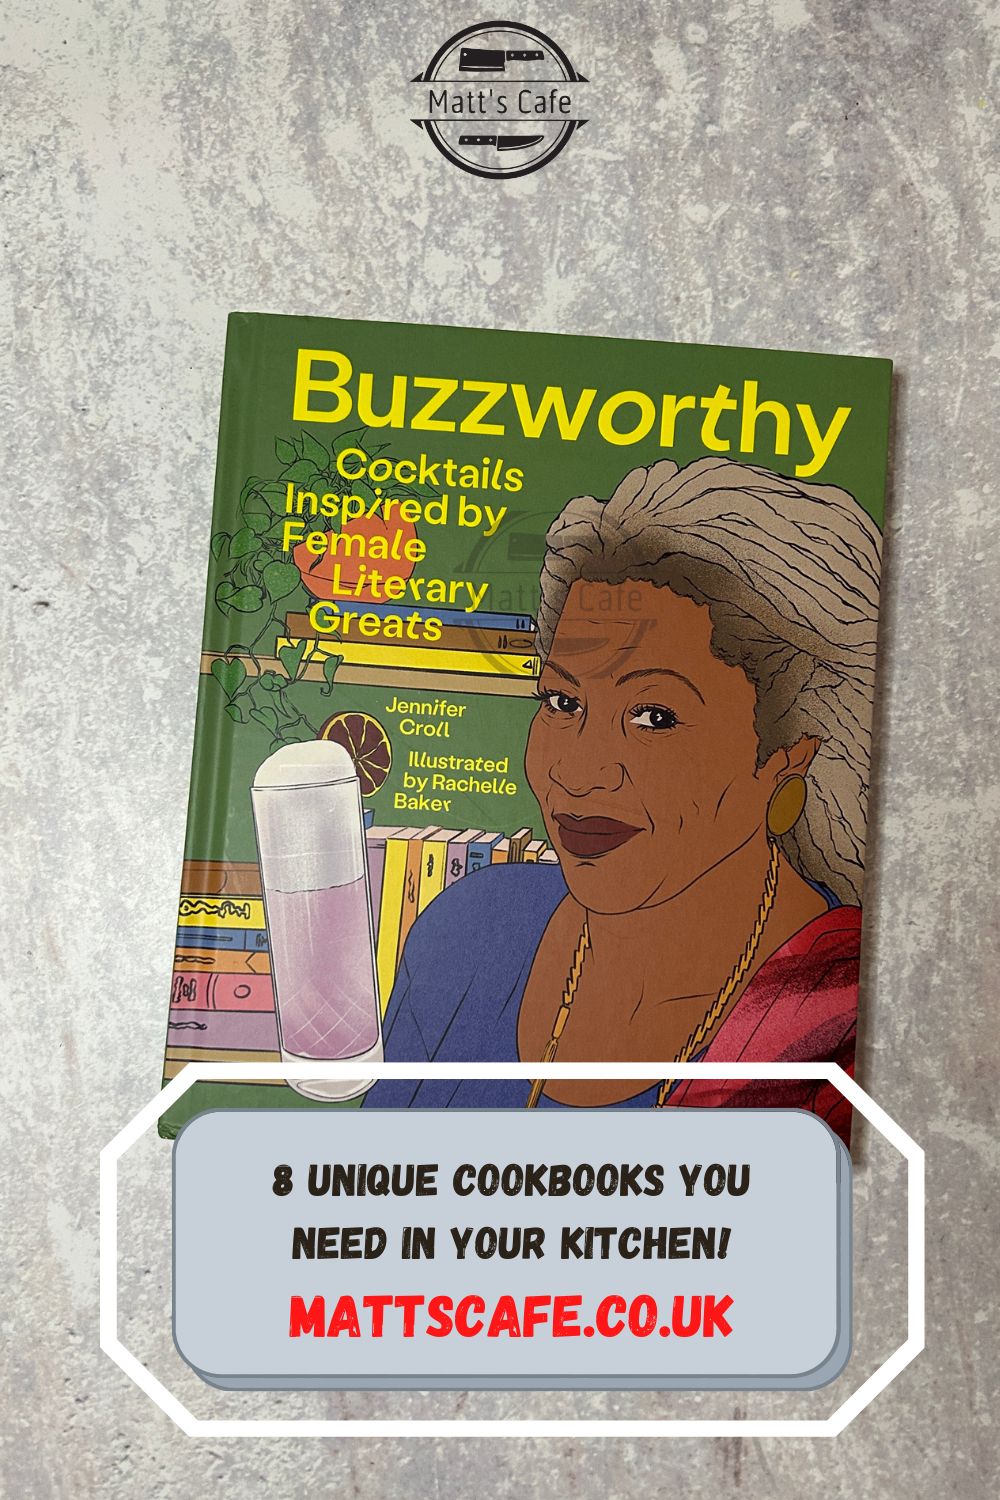 8 unique cookbooks you need in your kitchen!
